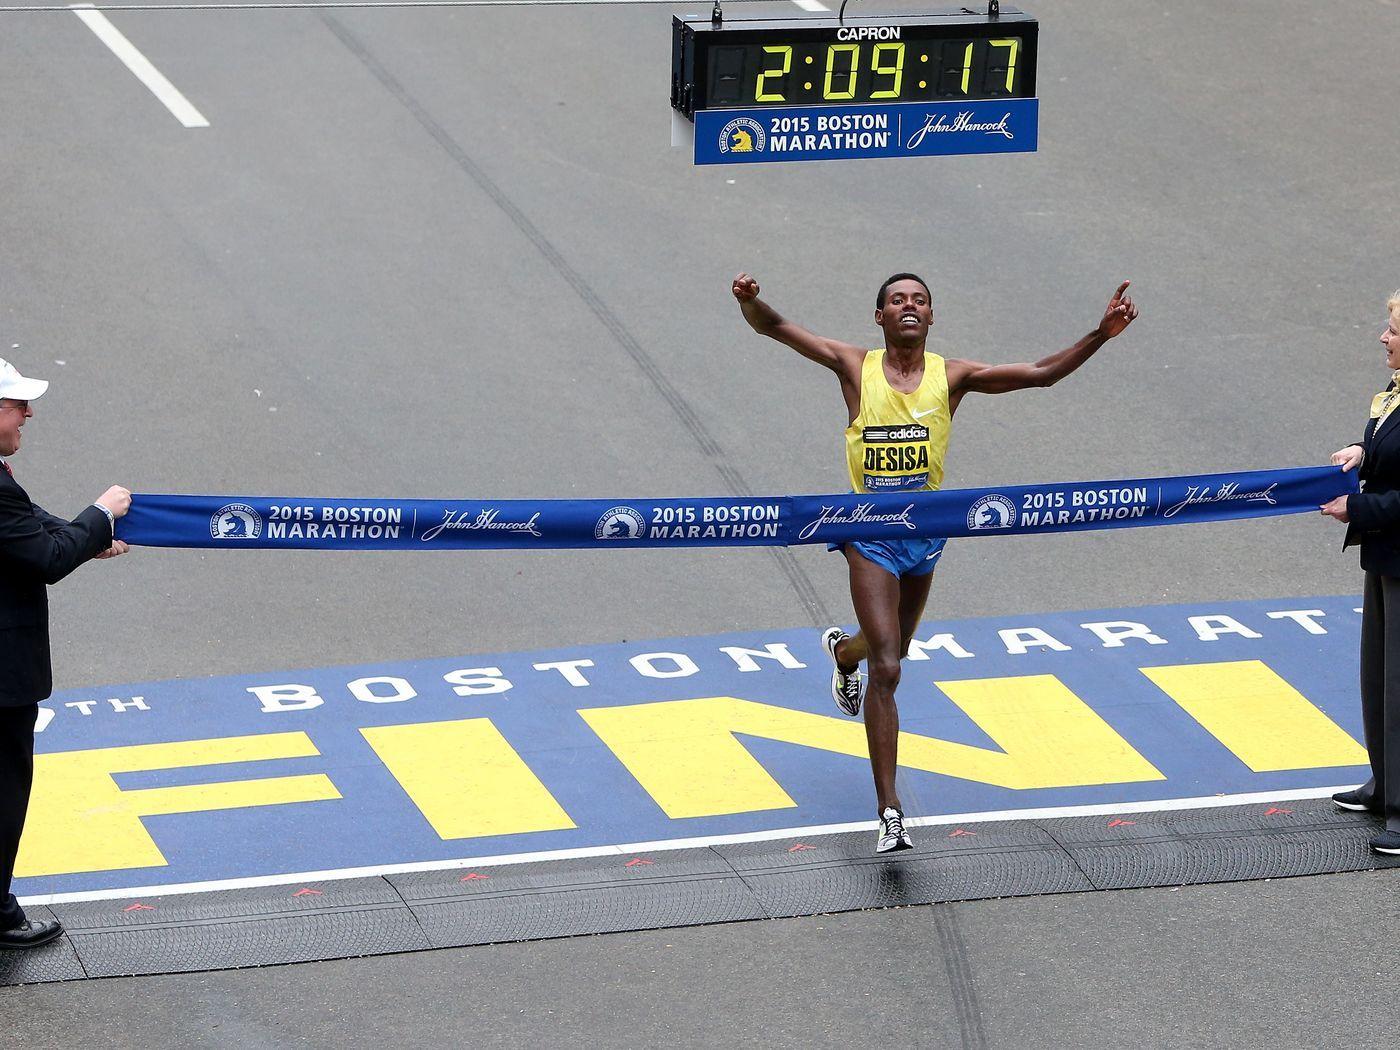 Boston Marathon 2016: Time and TV schedule for Monday's race